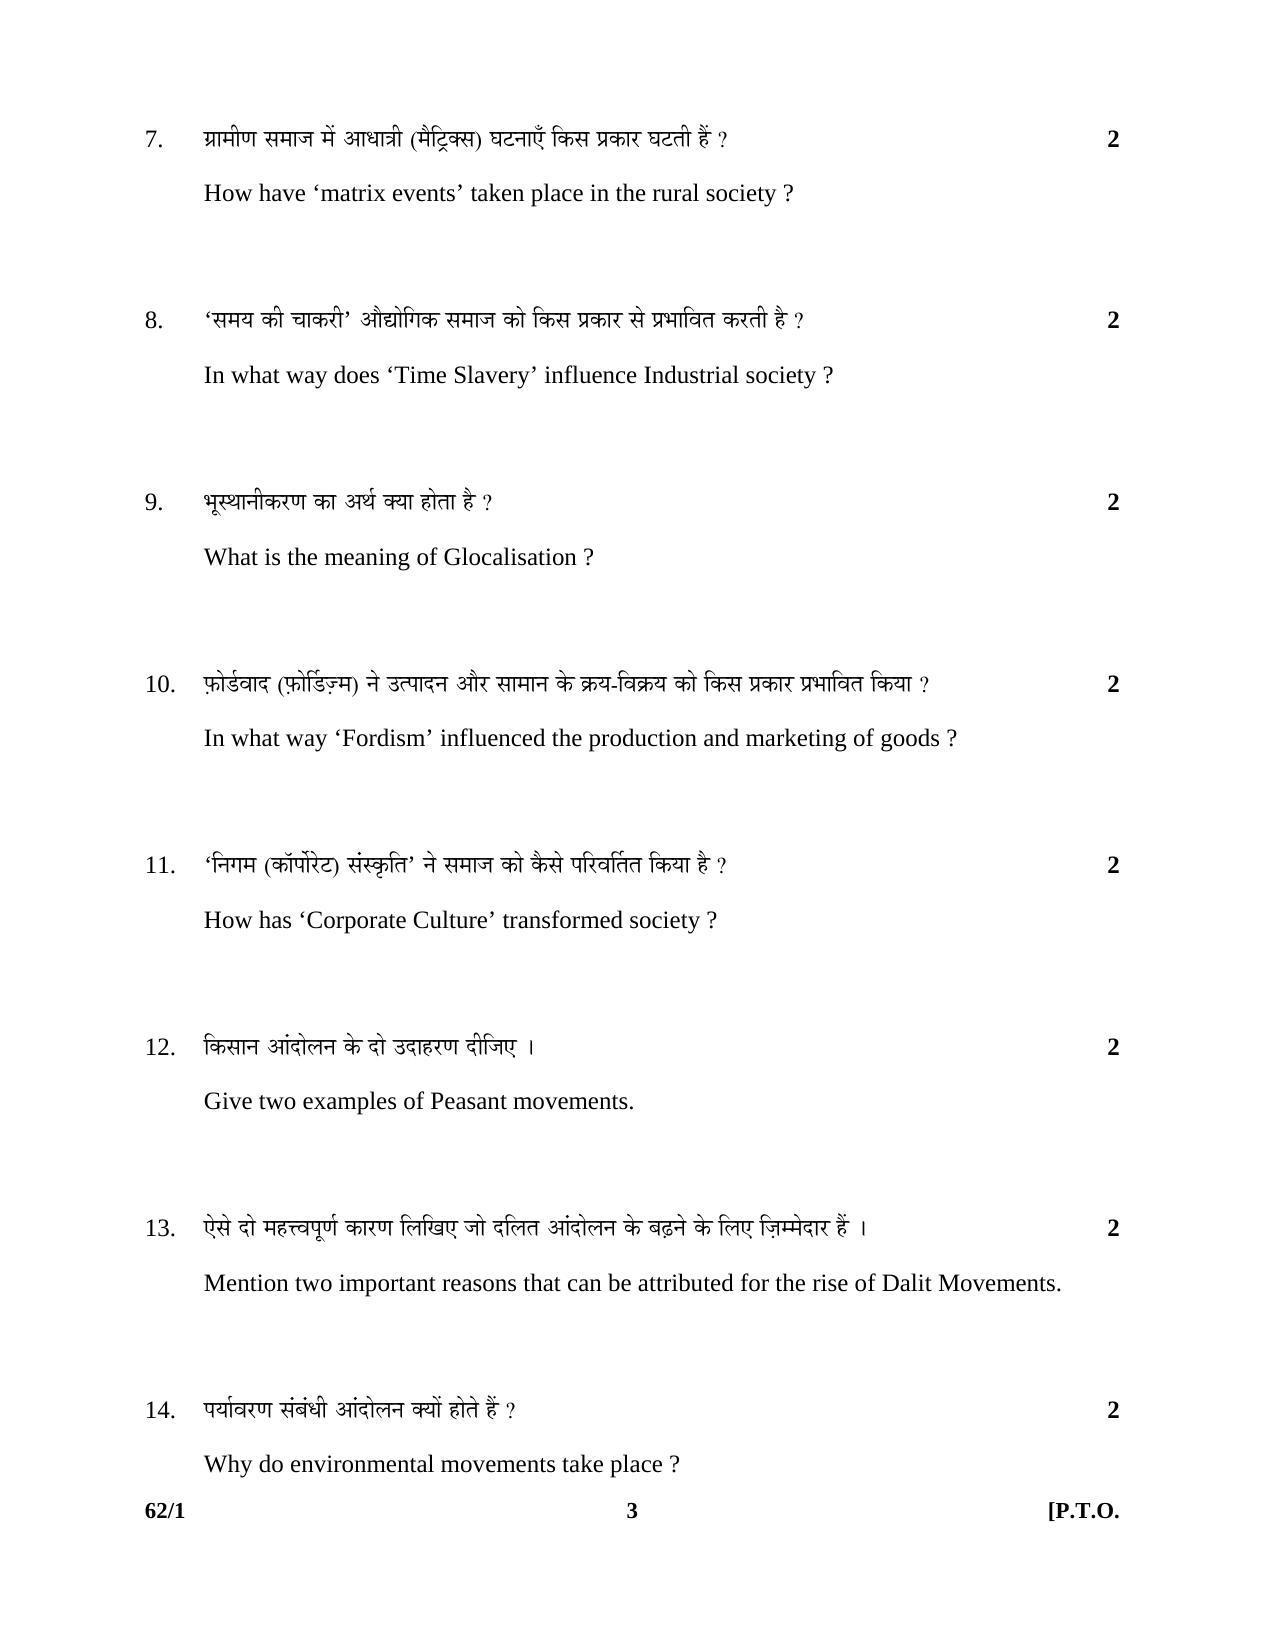 CBSE Class 12 62-1 SOCIOLOGY 2016 Question Paper - Page 3